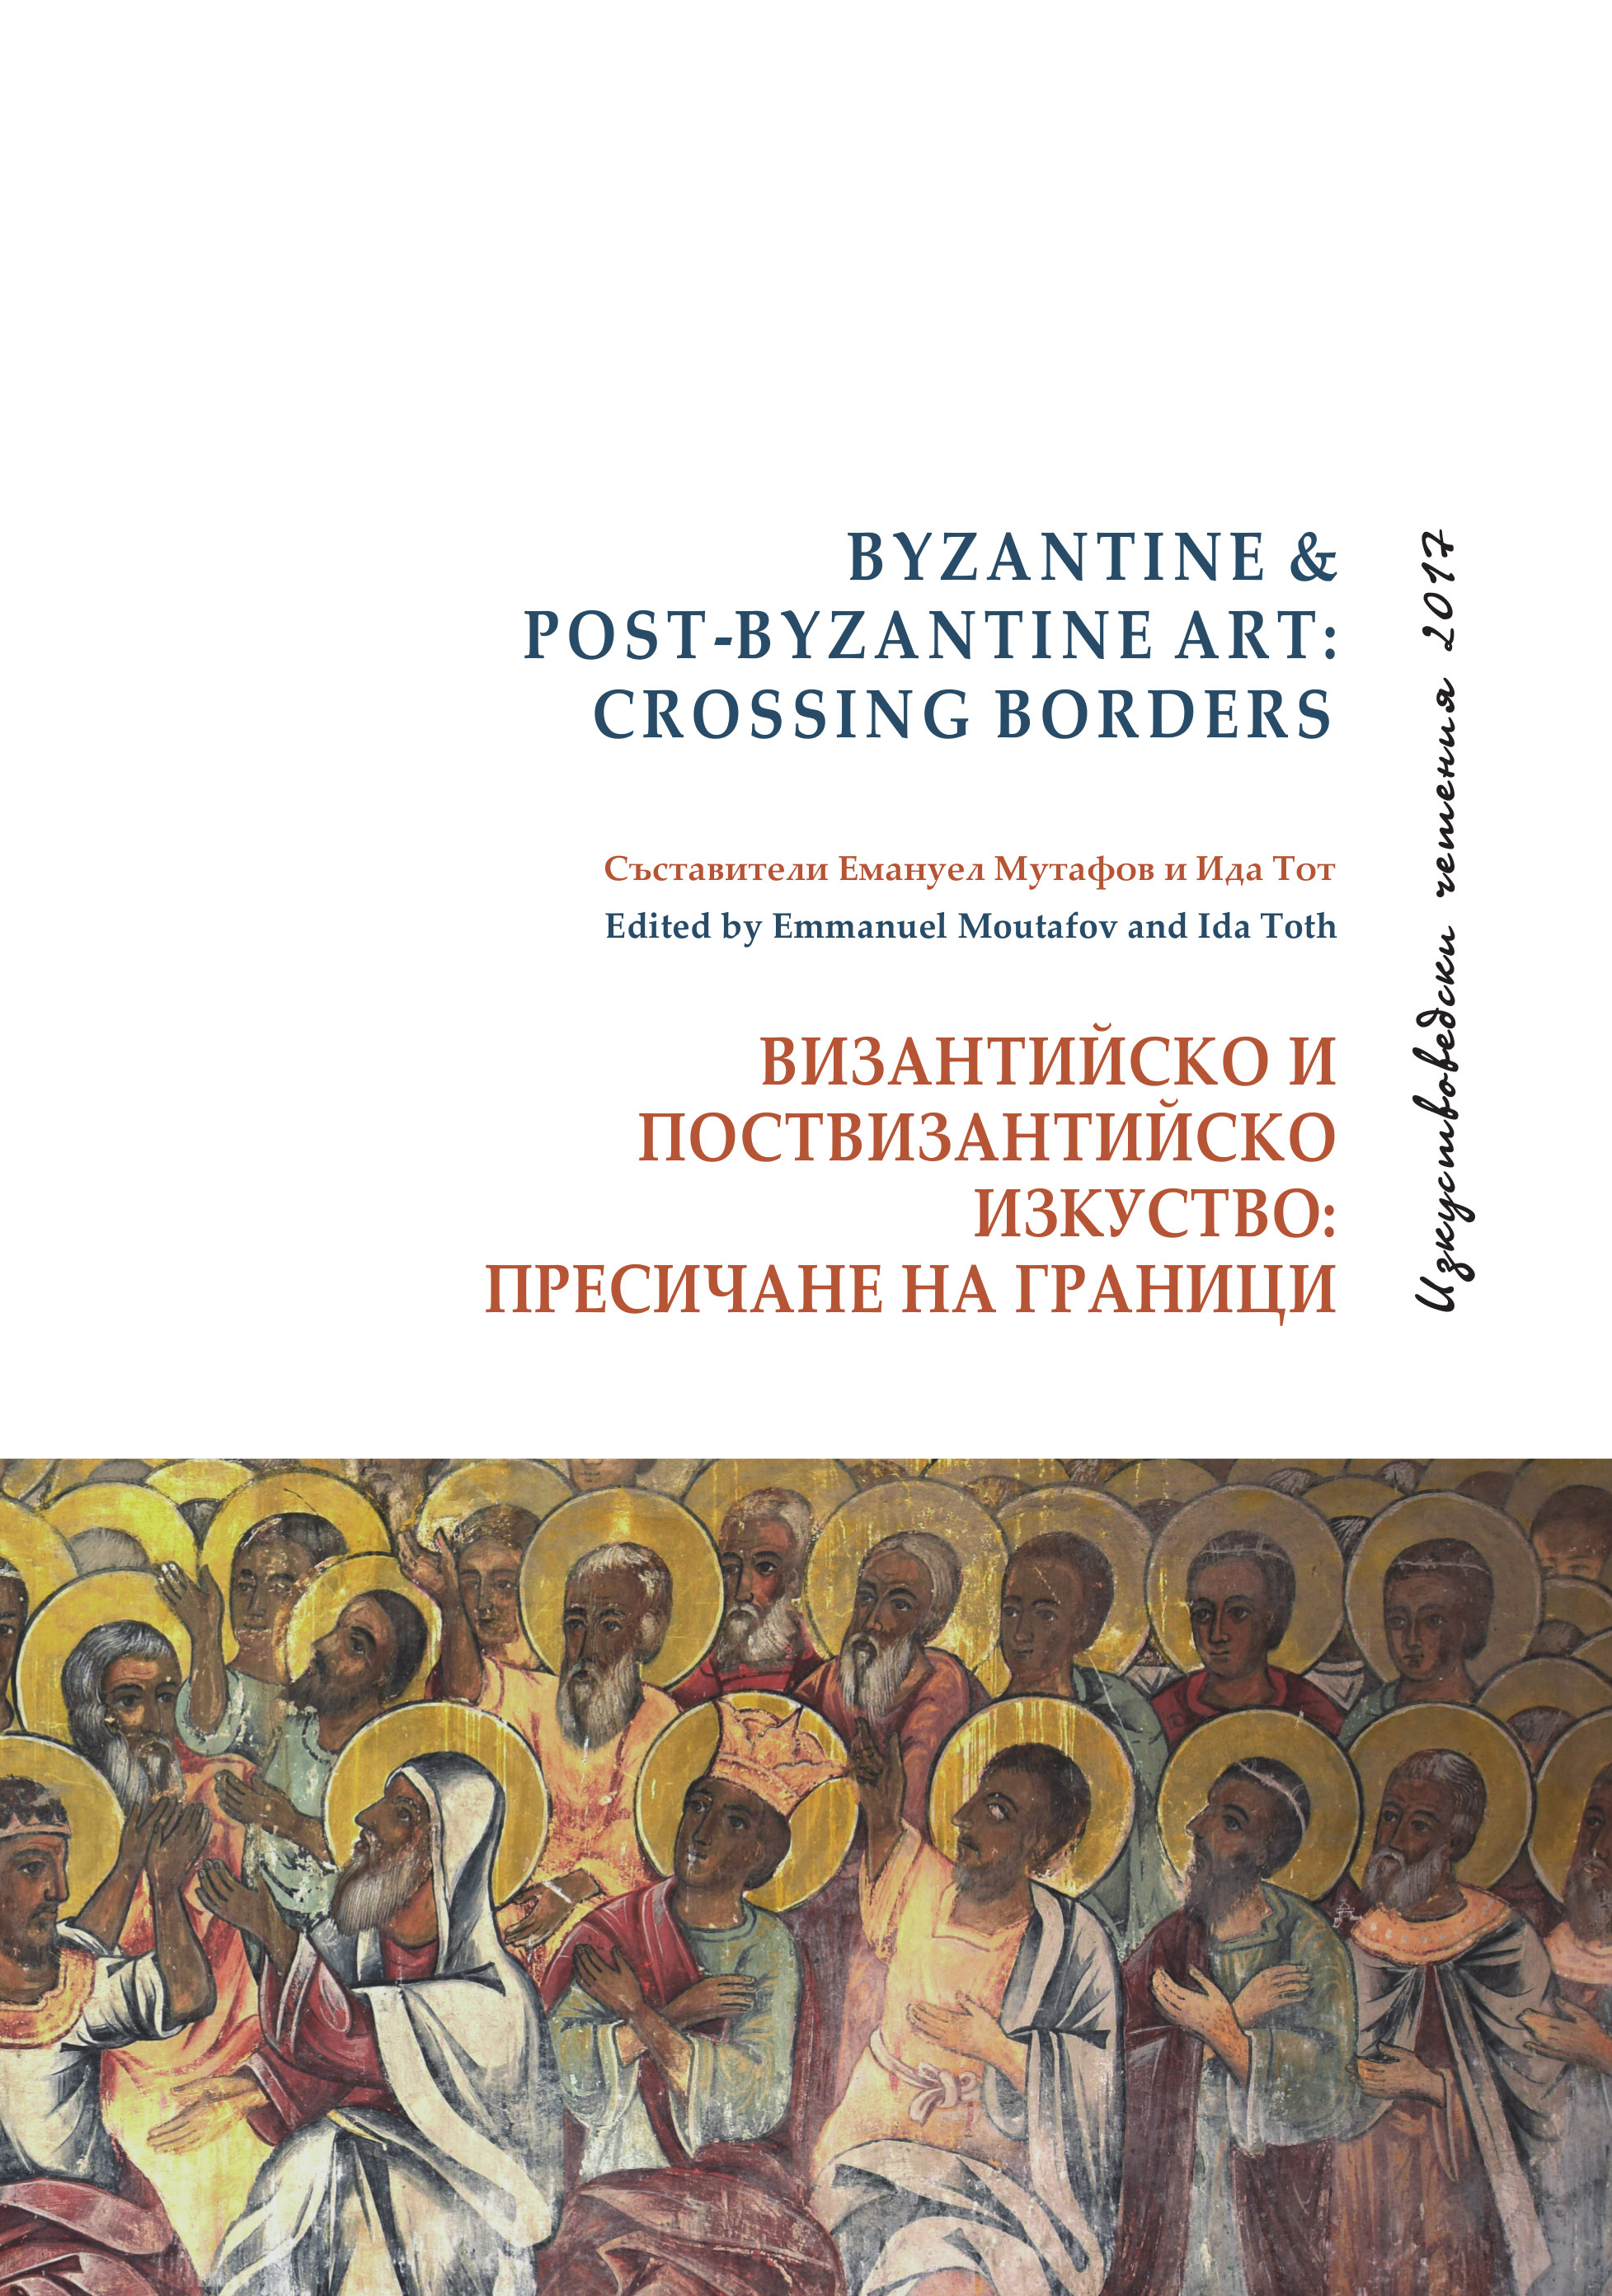 Painters of Western Training Working for Orthodox Patrons – Remarks on the Evidence of Late-medieval Transylvania (14th–15th Century) Cover Image